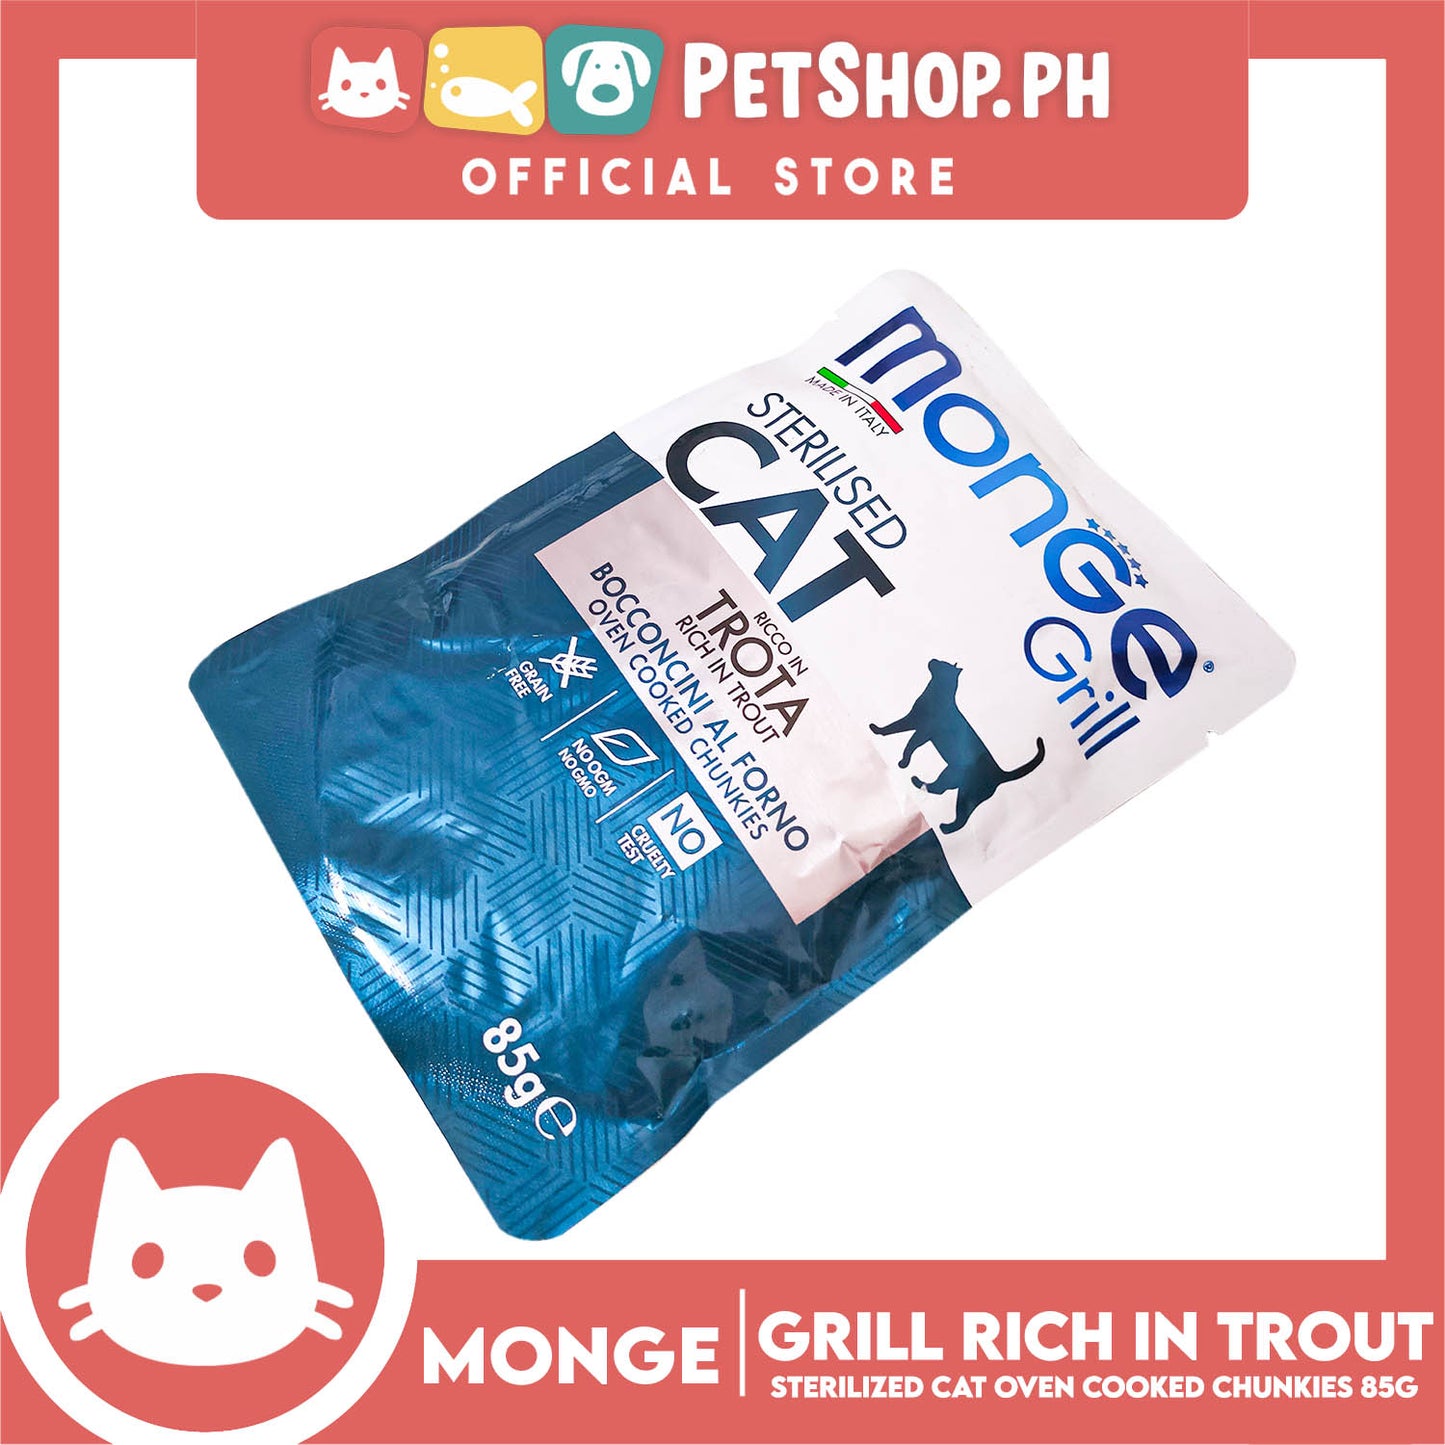 Monge Jelly Cat Pouch Grill For Sterilised Cats 85g (Trota, Rich In Trout) Cat Wet Food, Cat Pouch Food